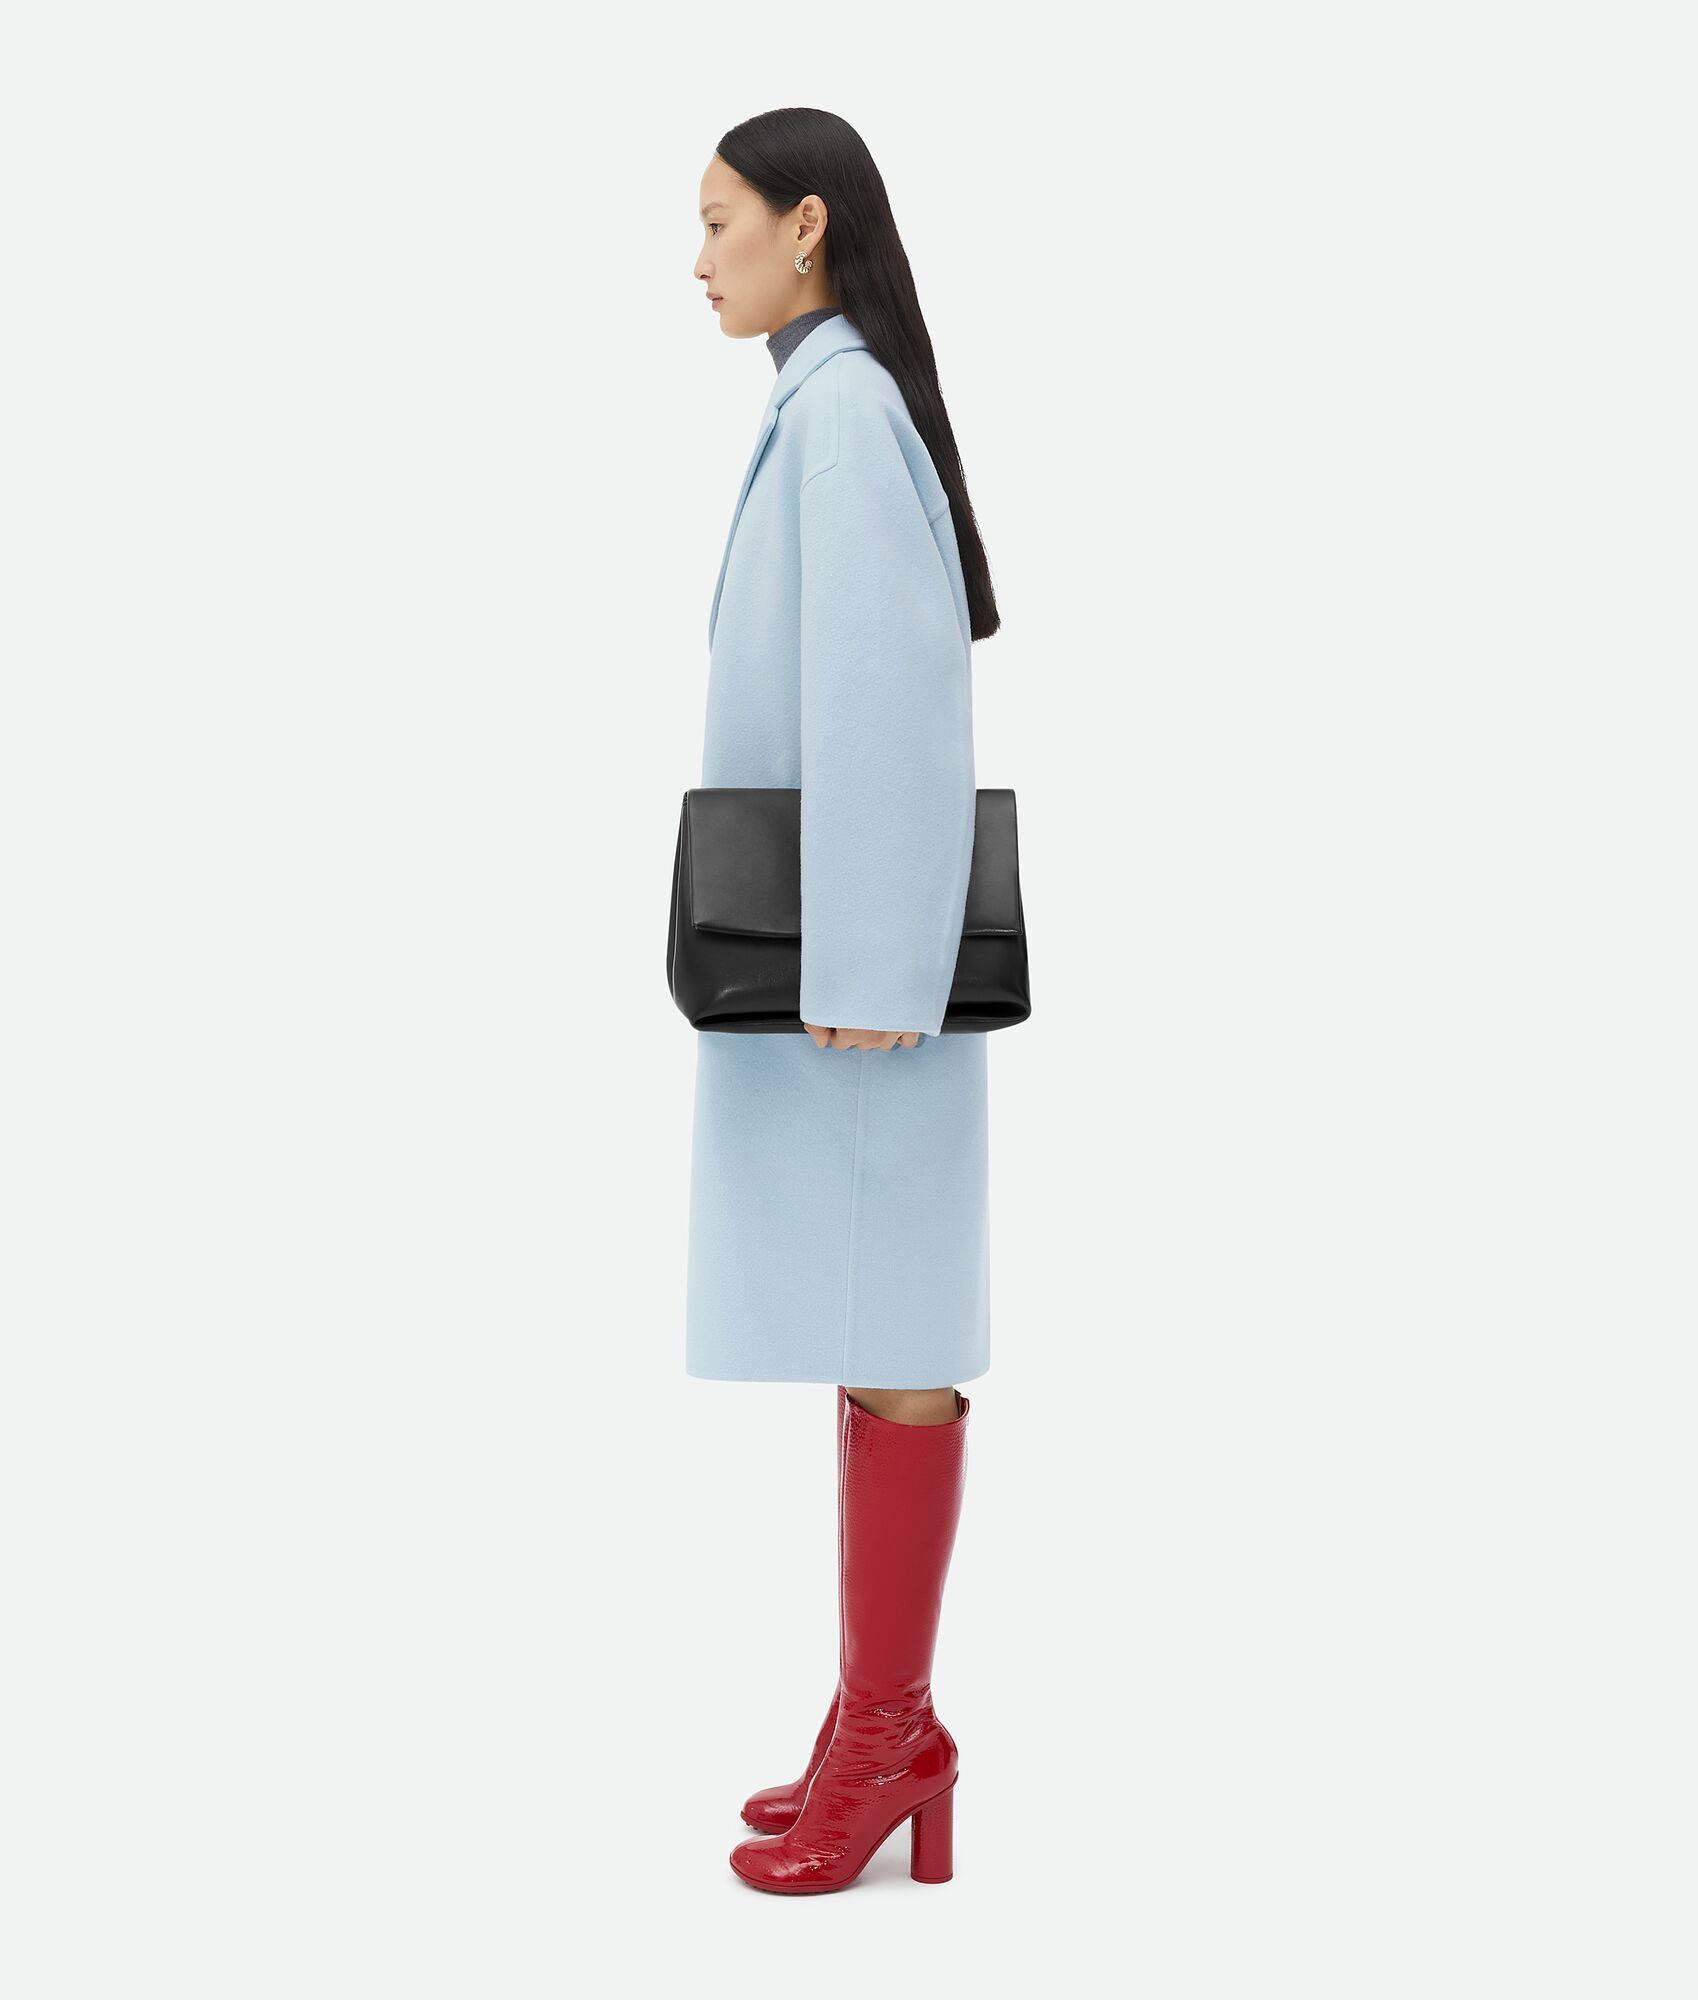 Black Bottega Veneta Purse on a model with a light blue pea coat and red boots. Shop at the Centre of Style, Yorkdale Shopping Centre.